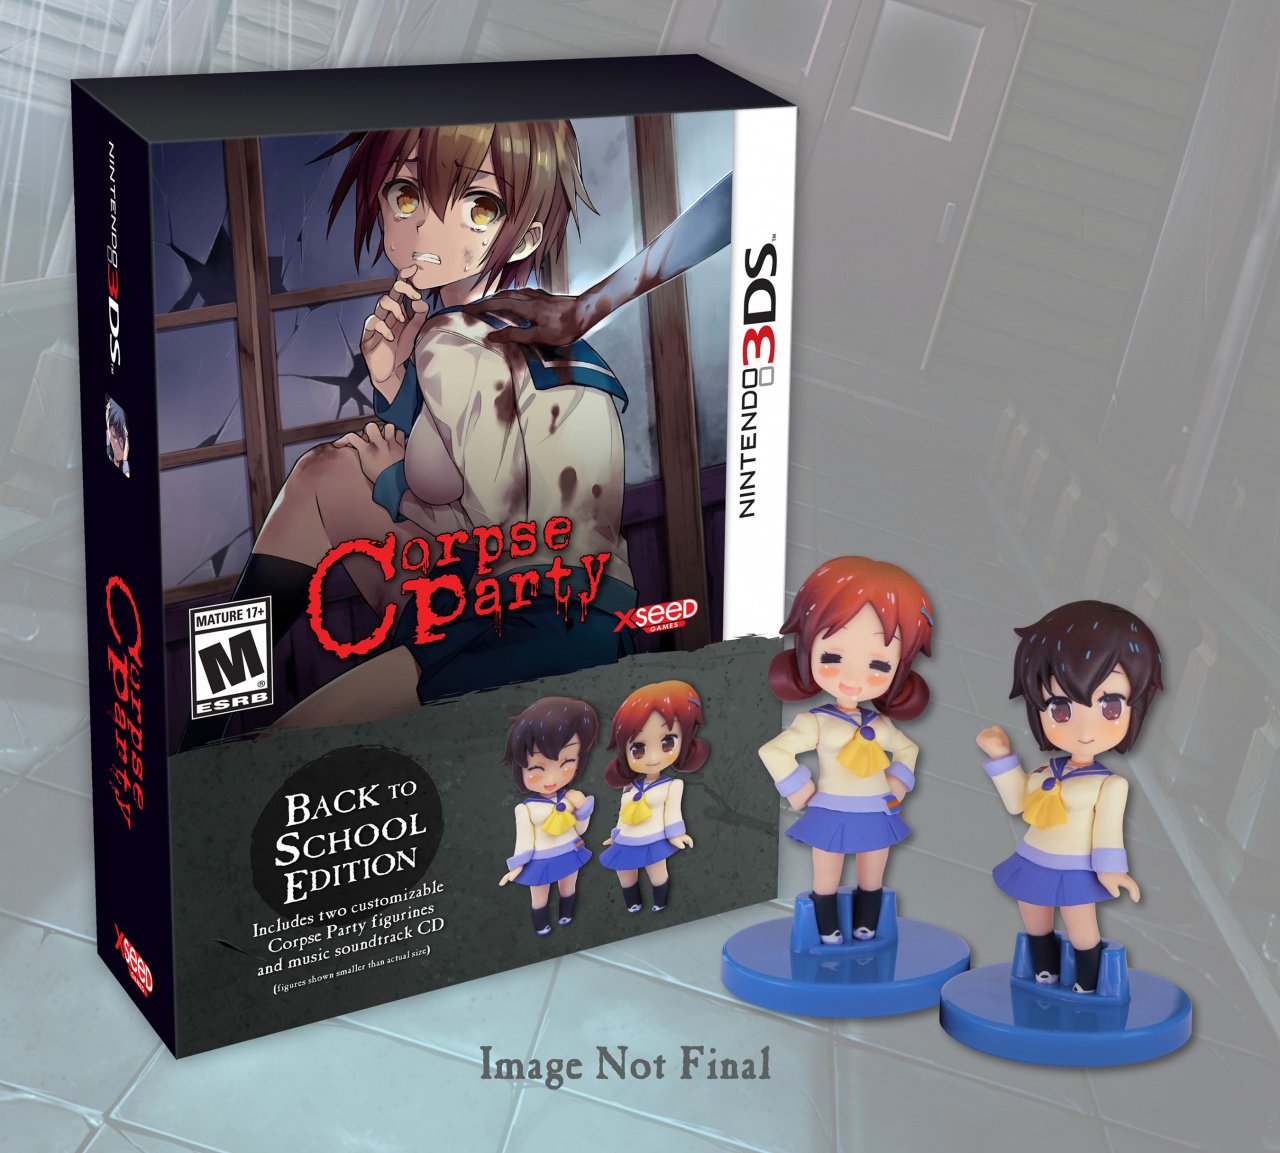 xseed-unveils-corpse-party-3ds-details-including-a-back-to-school-edition-nintendo-life